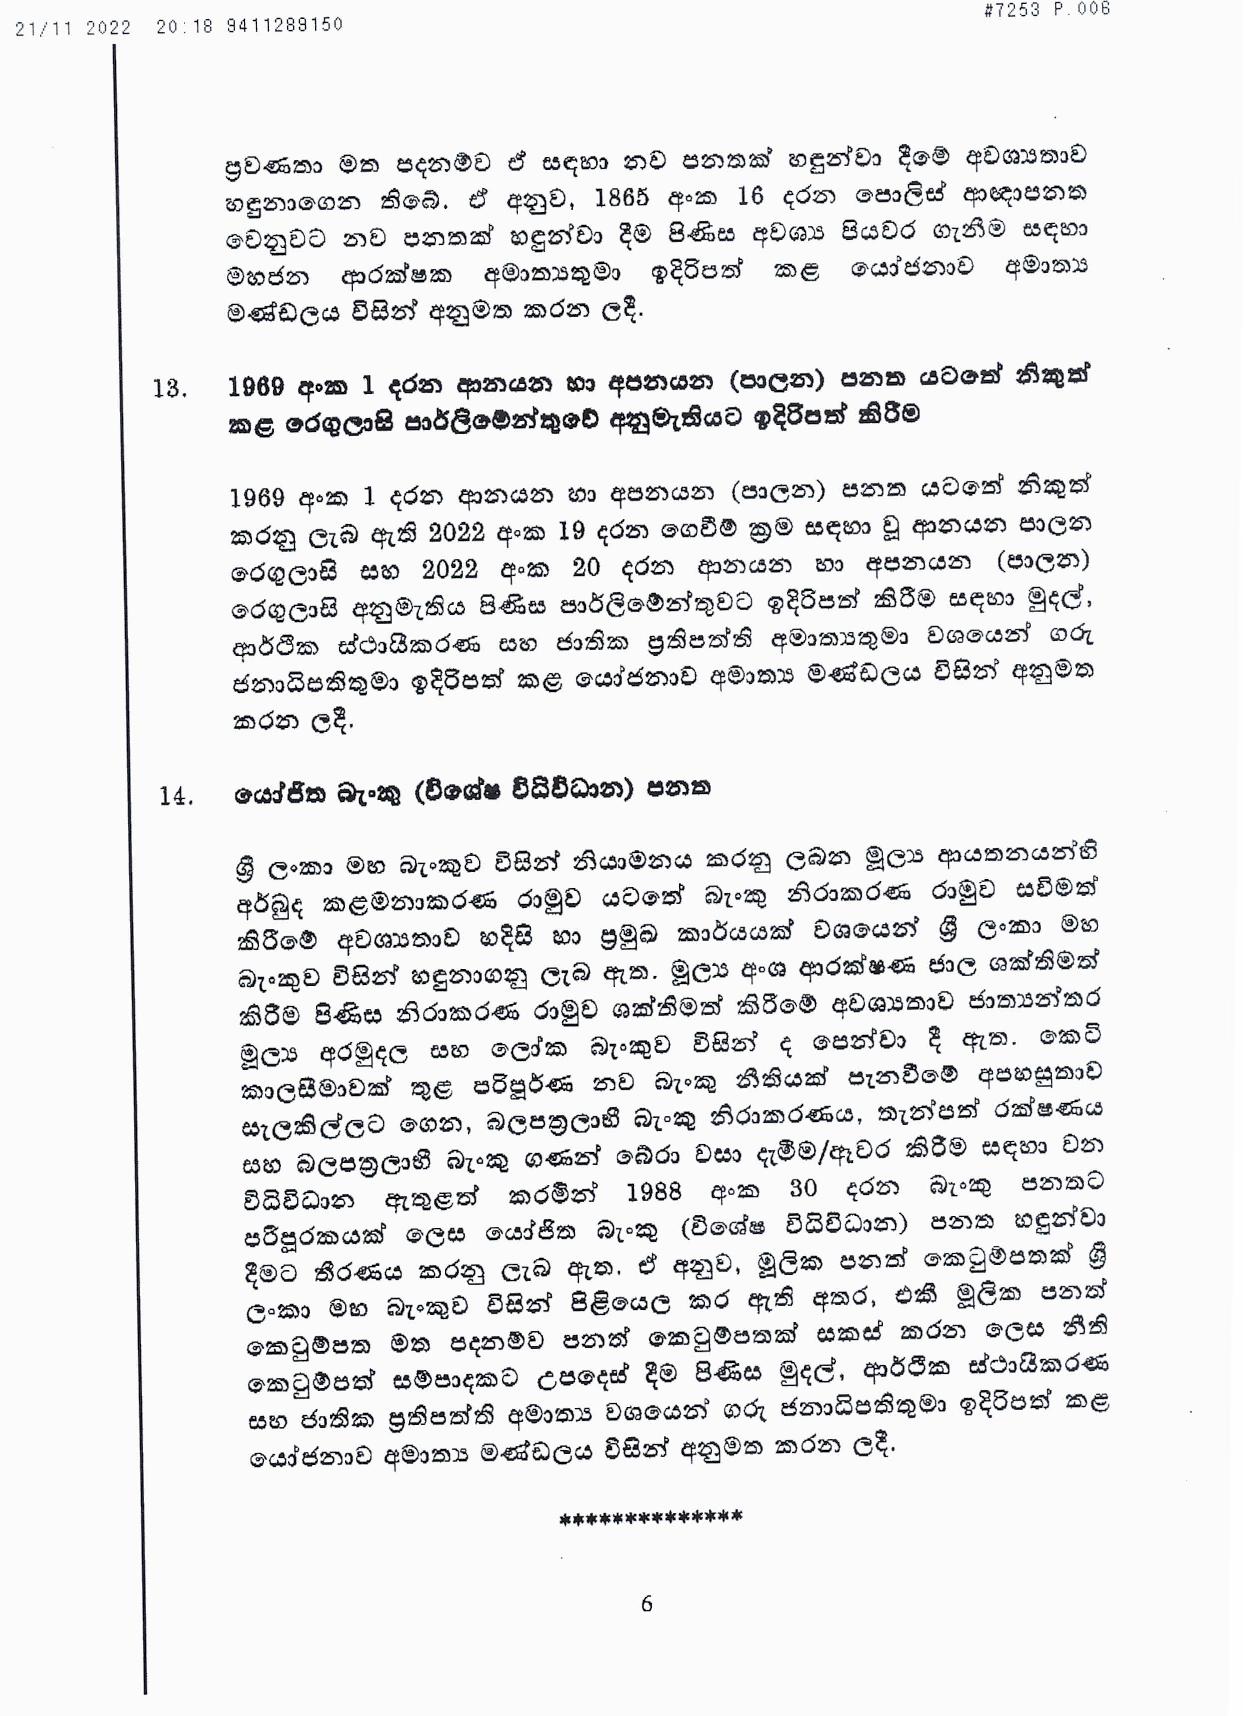 Cabinet Decision on 21.11.2022 page 006